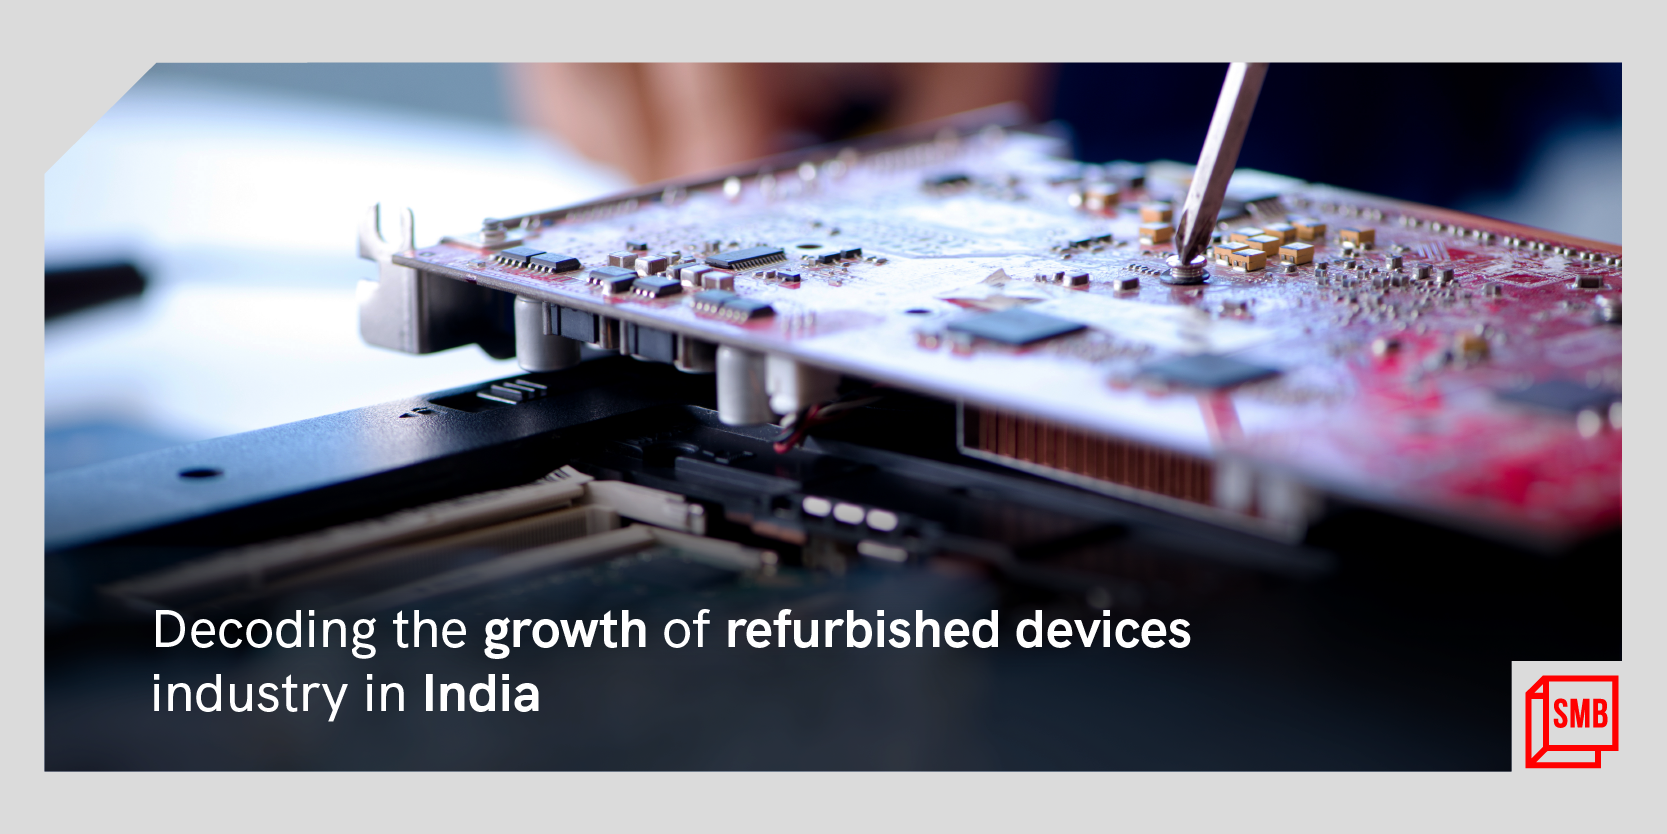 How the pandemic led to the emergence of a new, promising market for refurbished devices in India